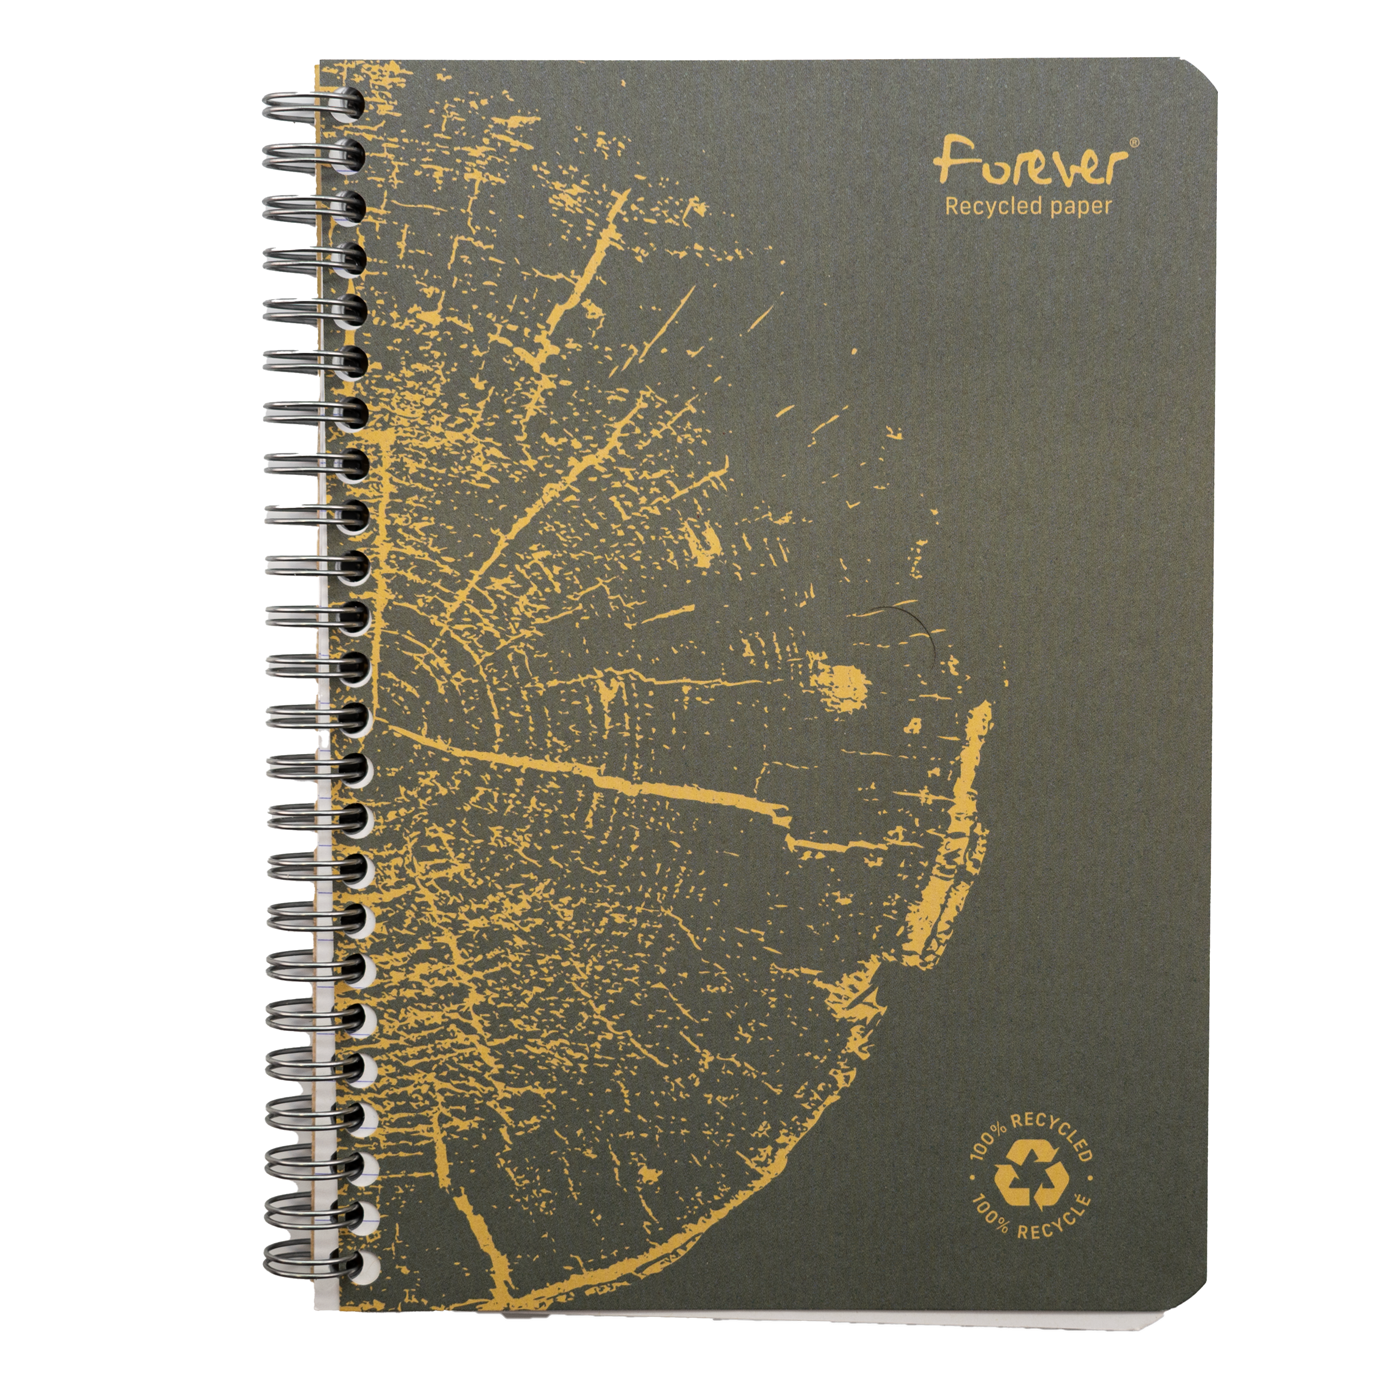 A5 Spiral Bound Lined Notebook From 1.00 GBP